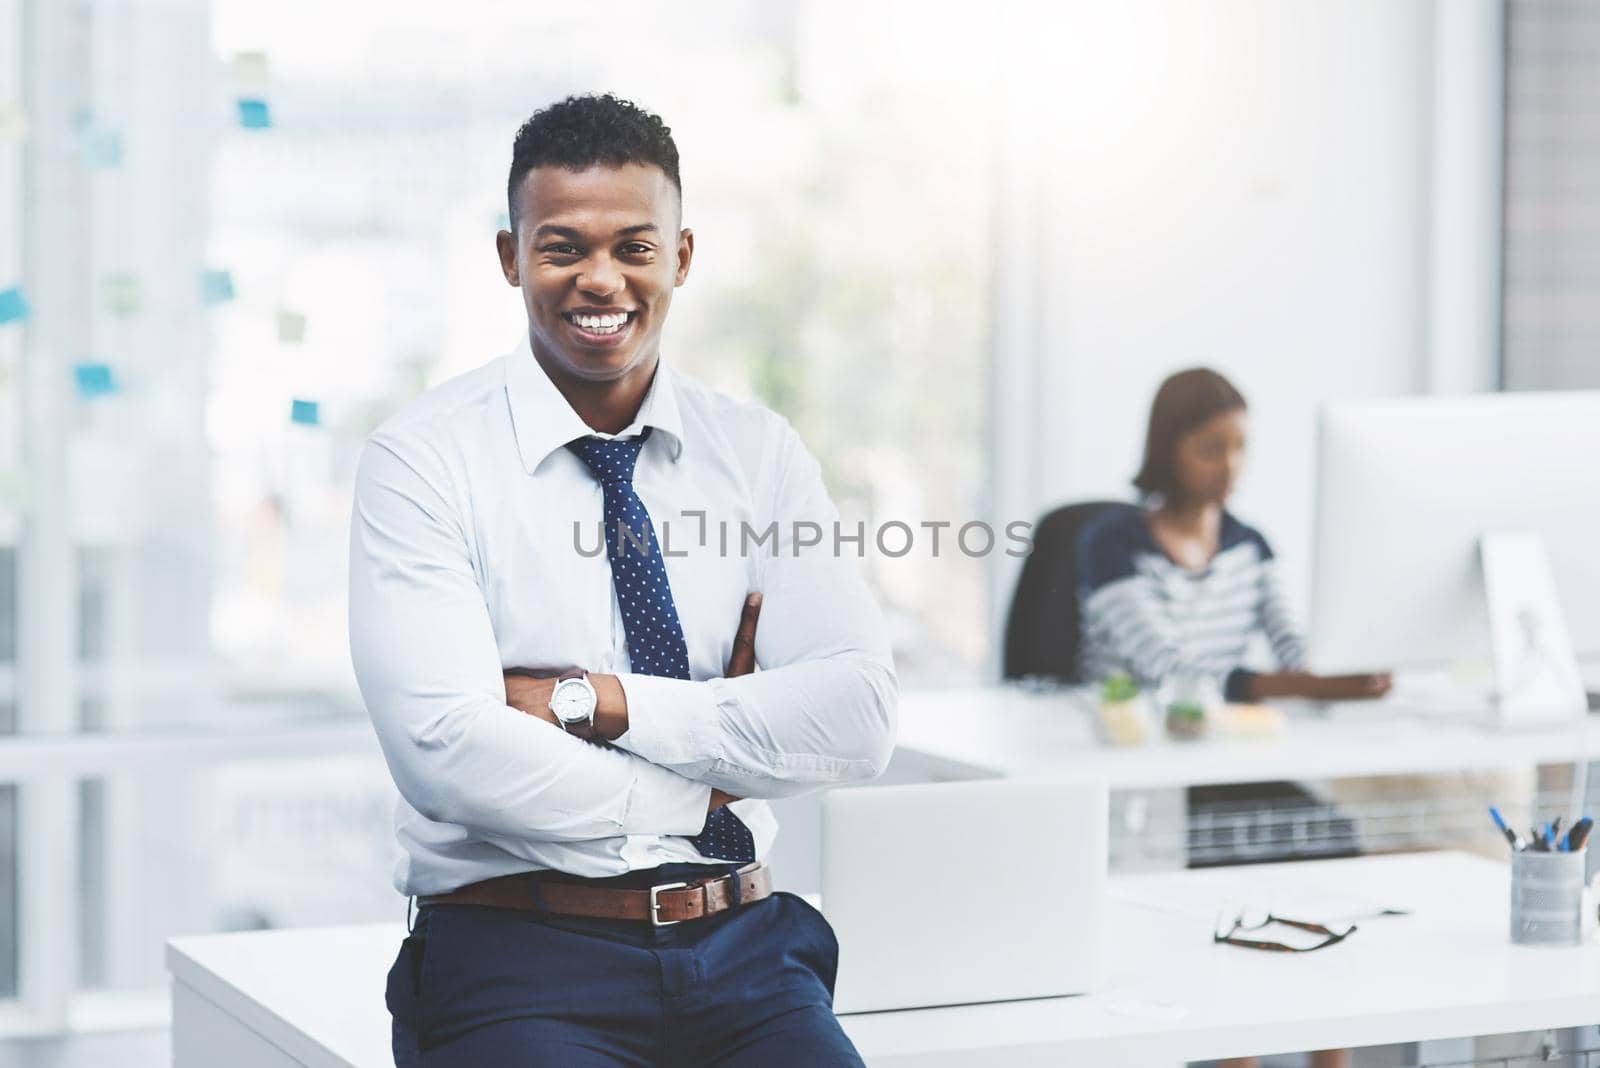 Success always starts in the mind. Portrait of a young businessman standing in his office and posing with his arms crossed